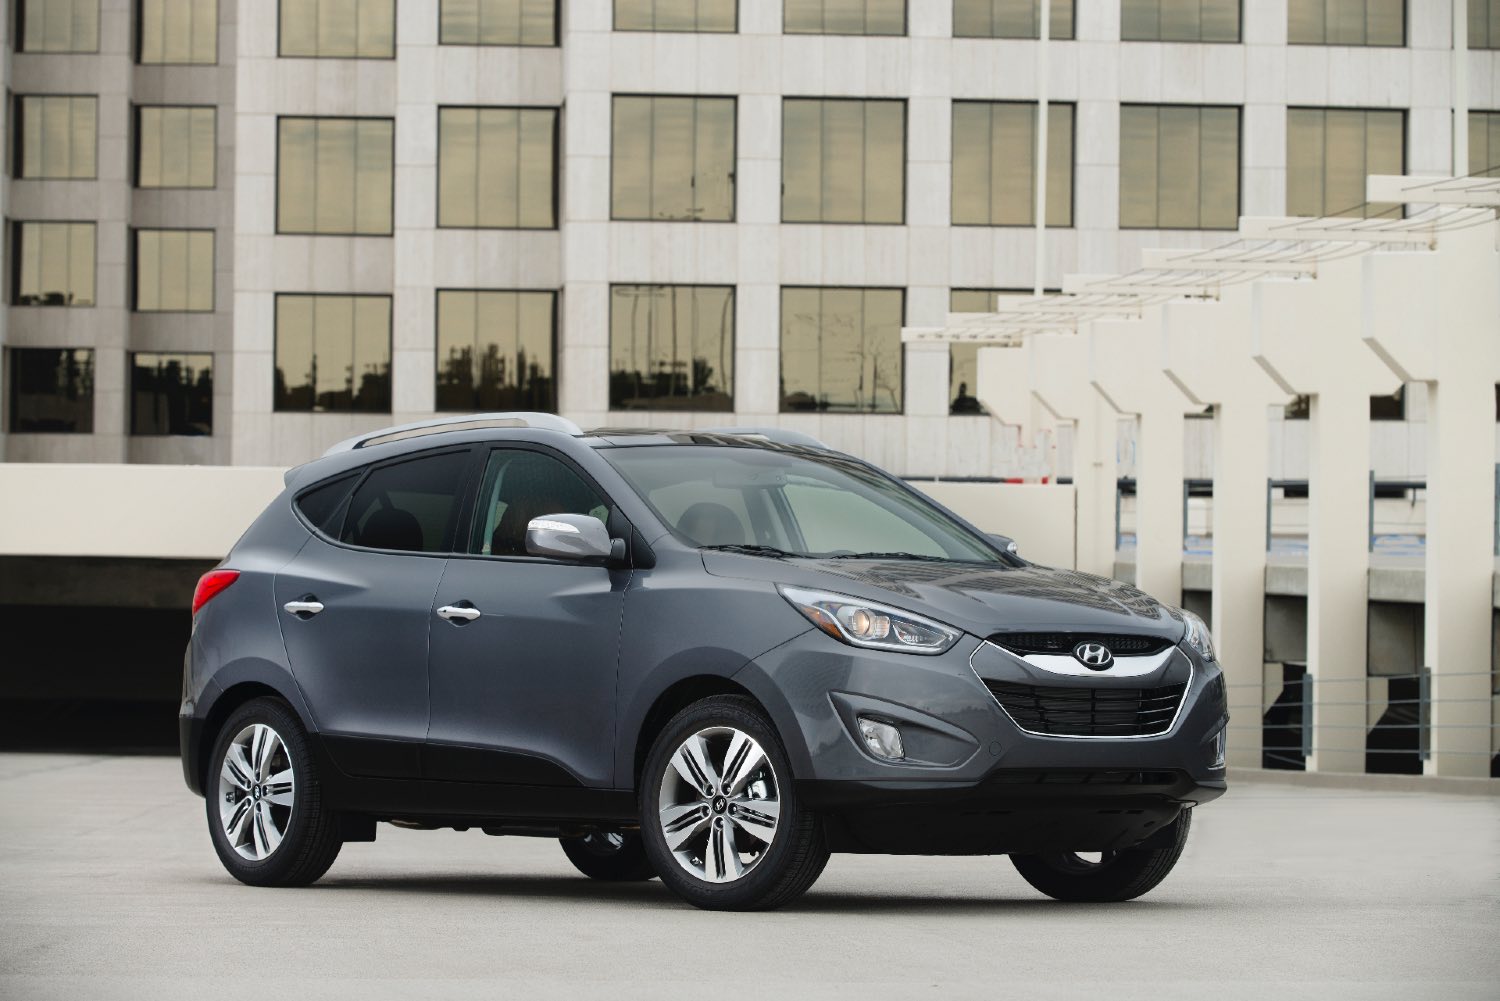 2015 Hyundai Tucson from the front